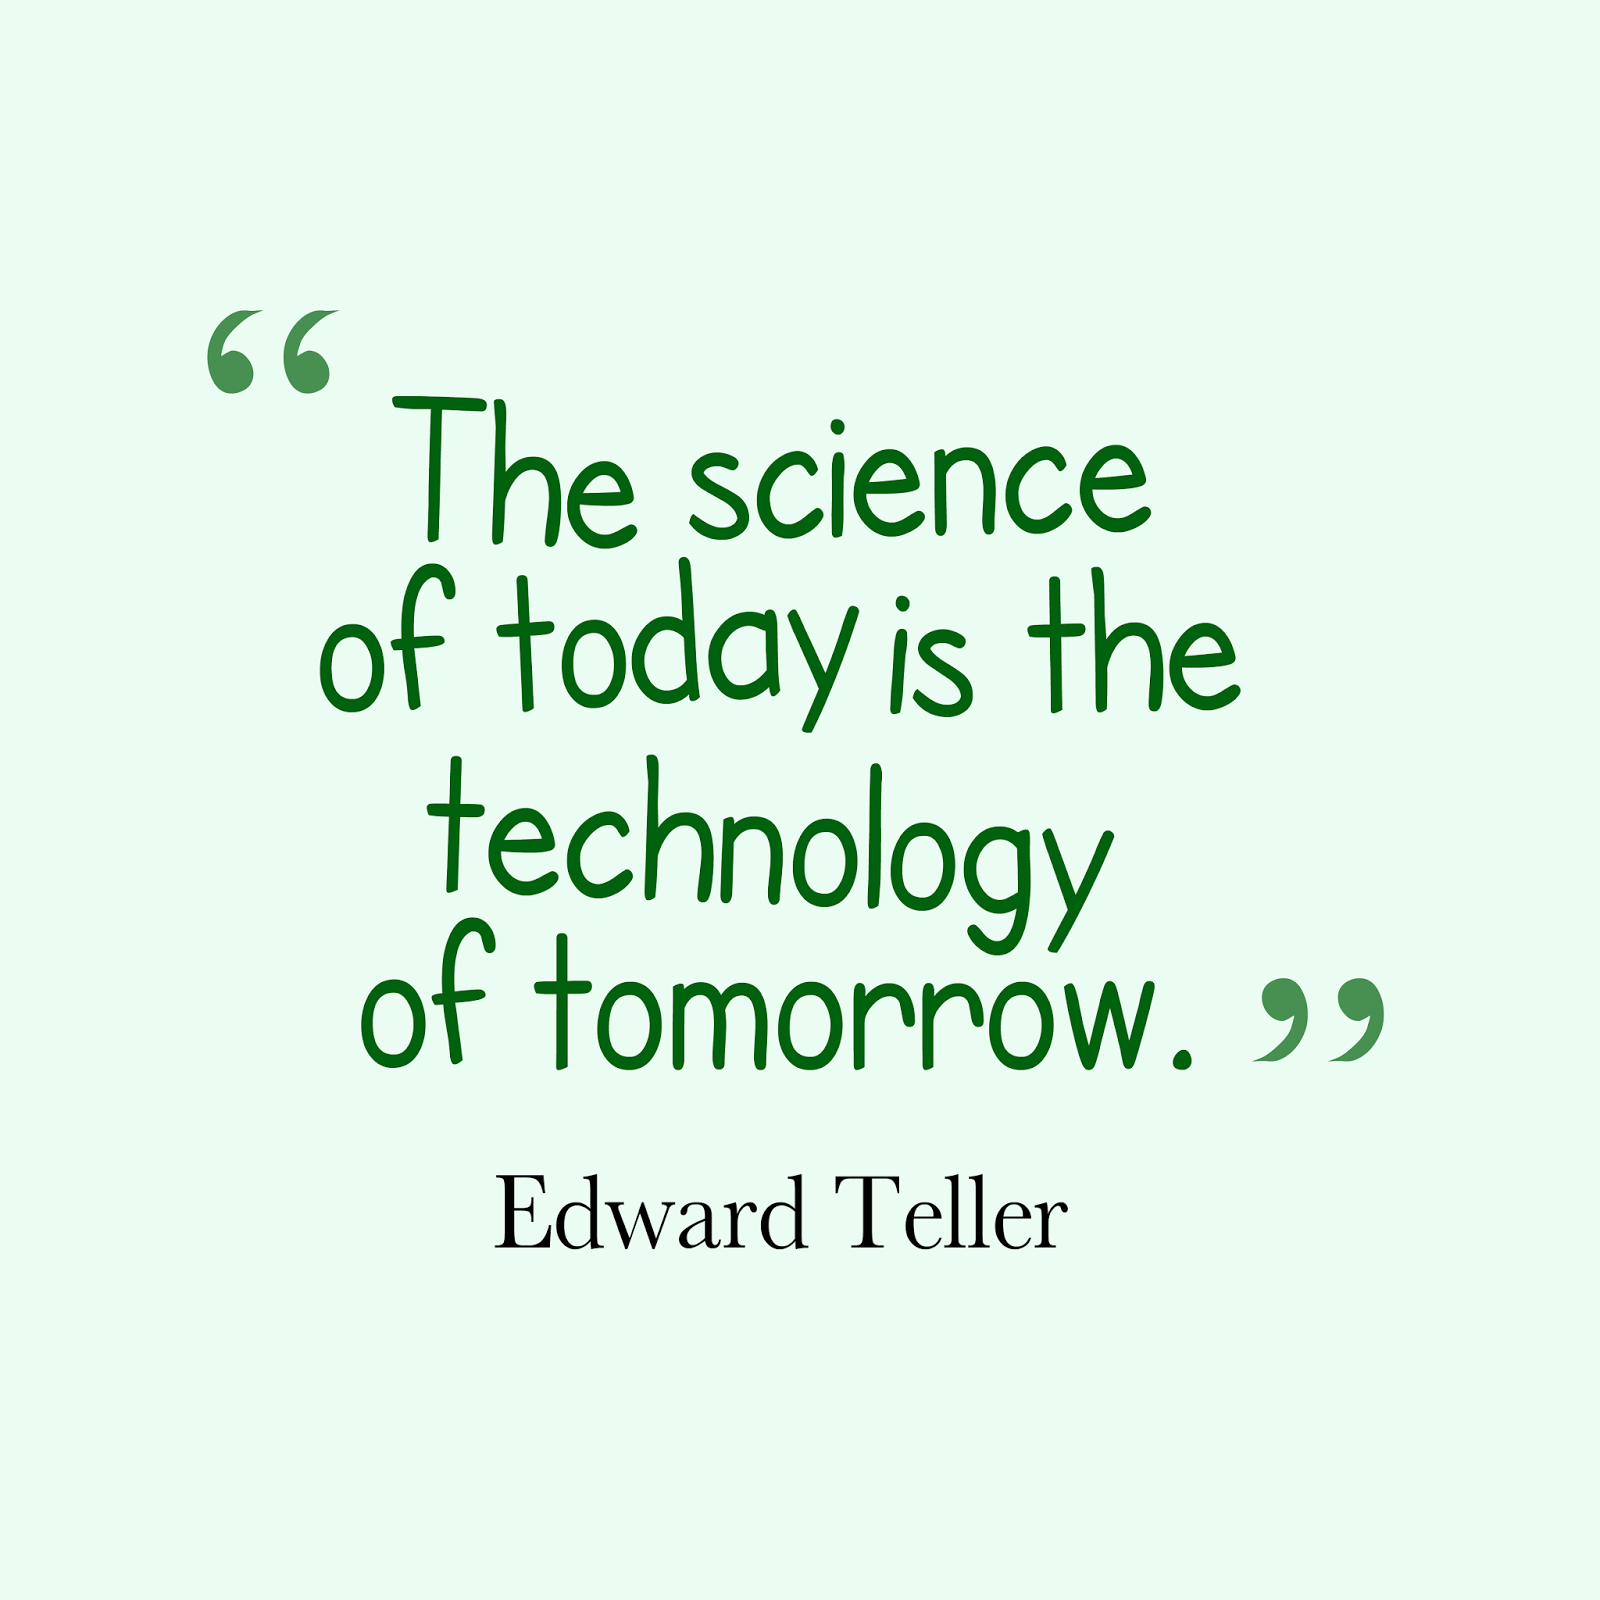 10 Best Technology Quotes to Inspire you more induldging in Tech | Tech N  Telecom